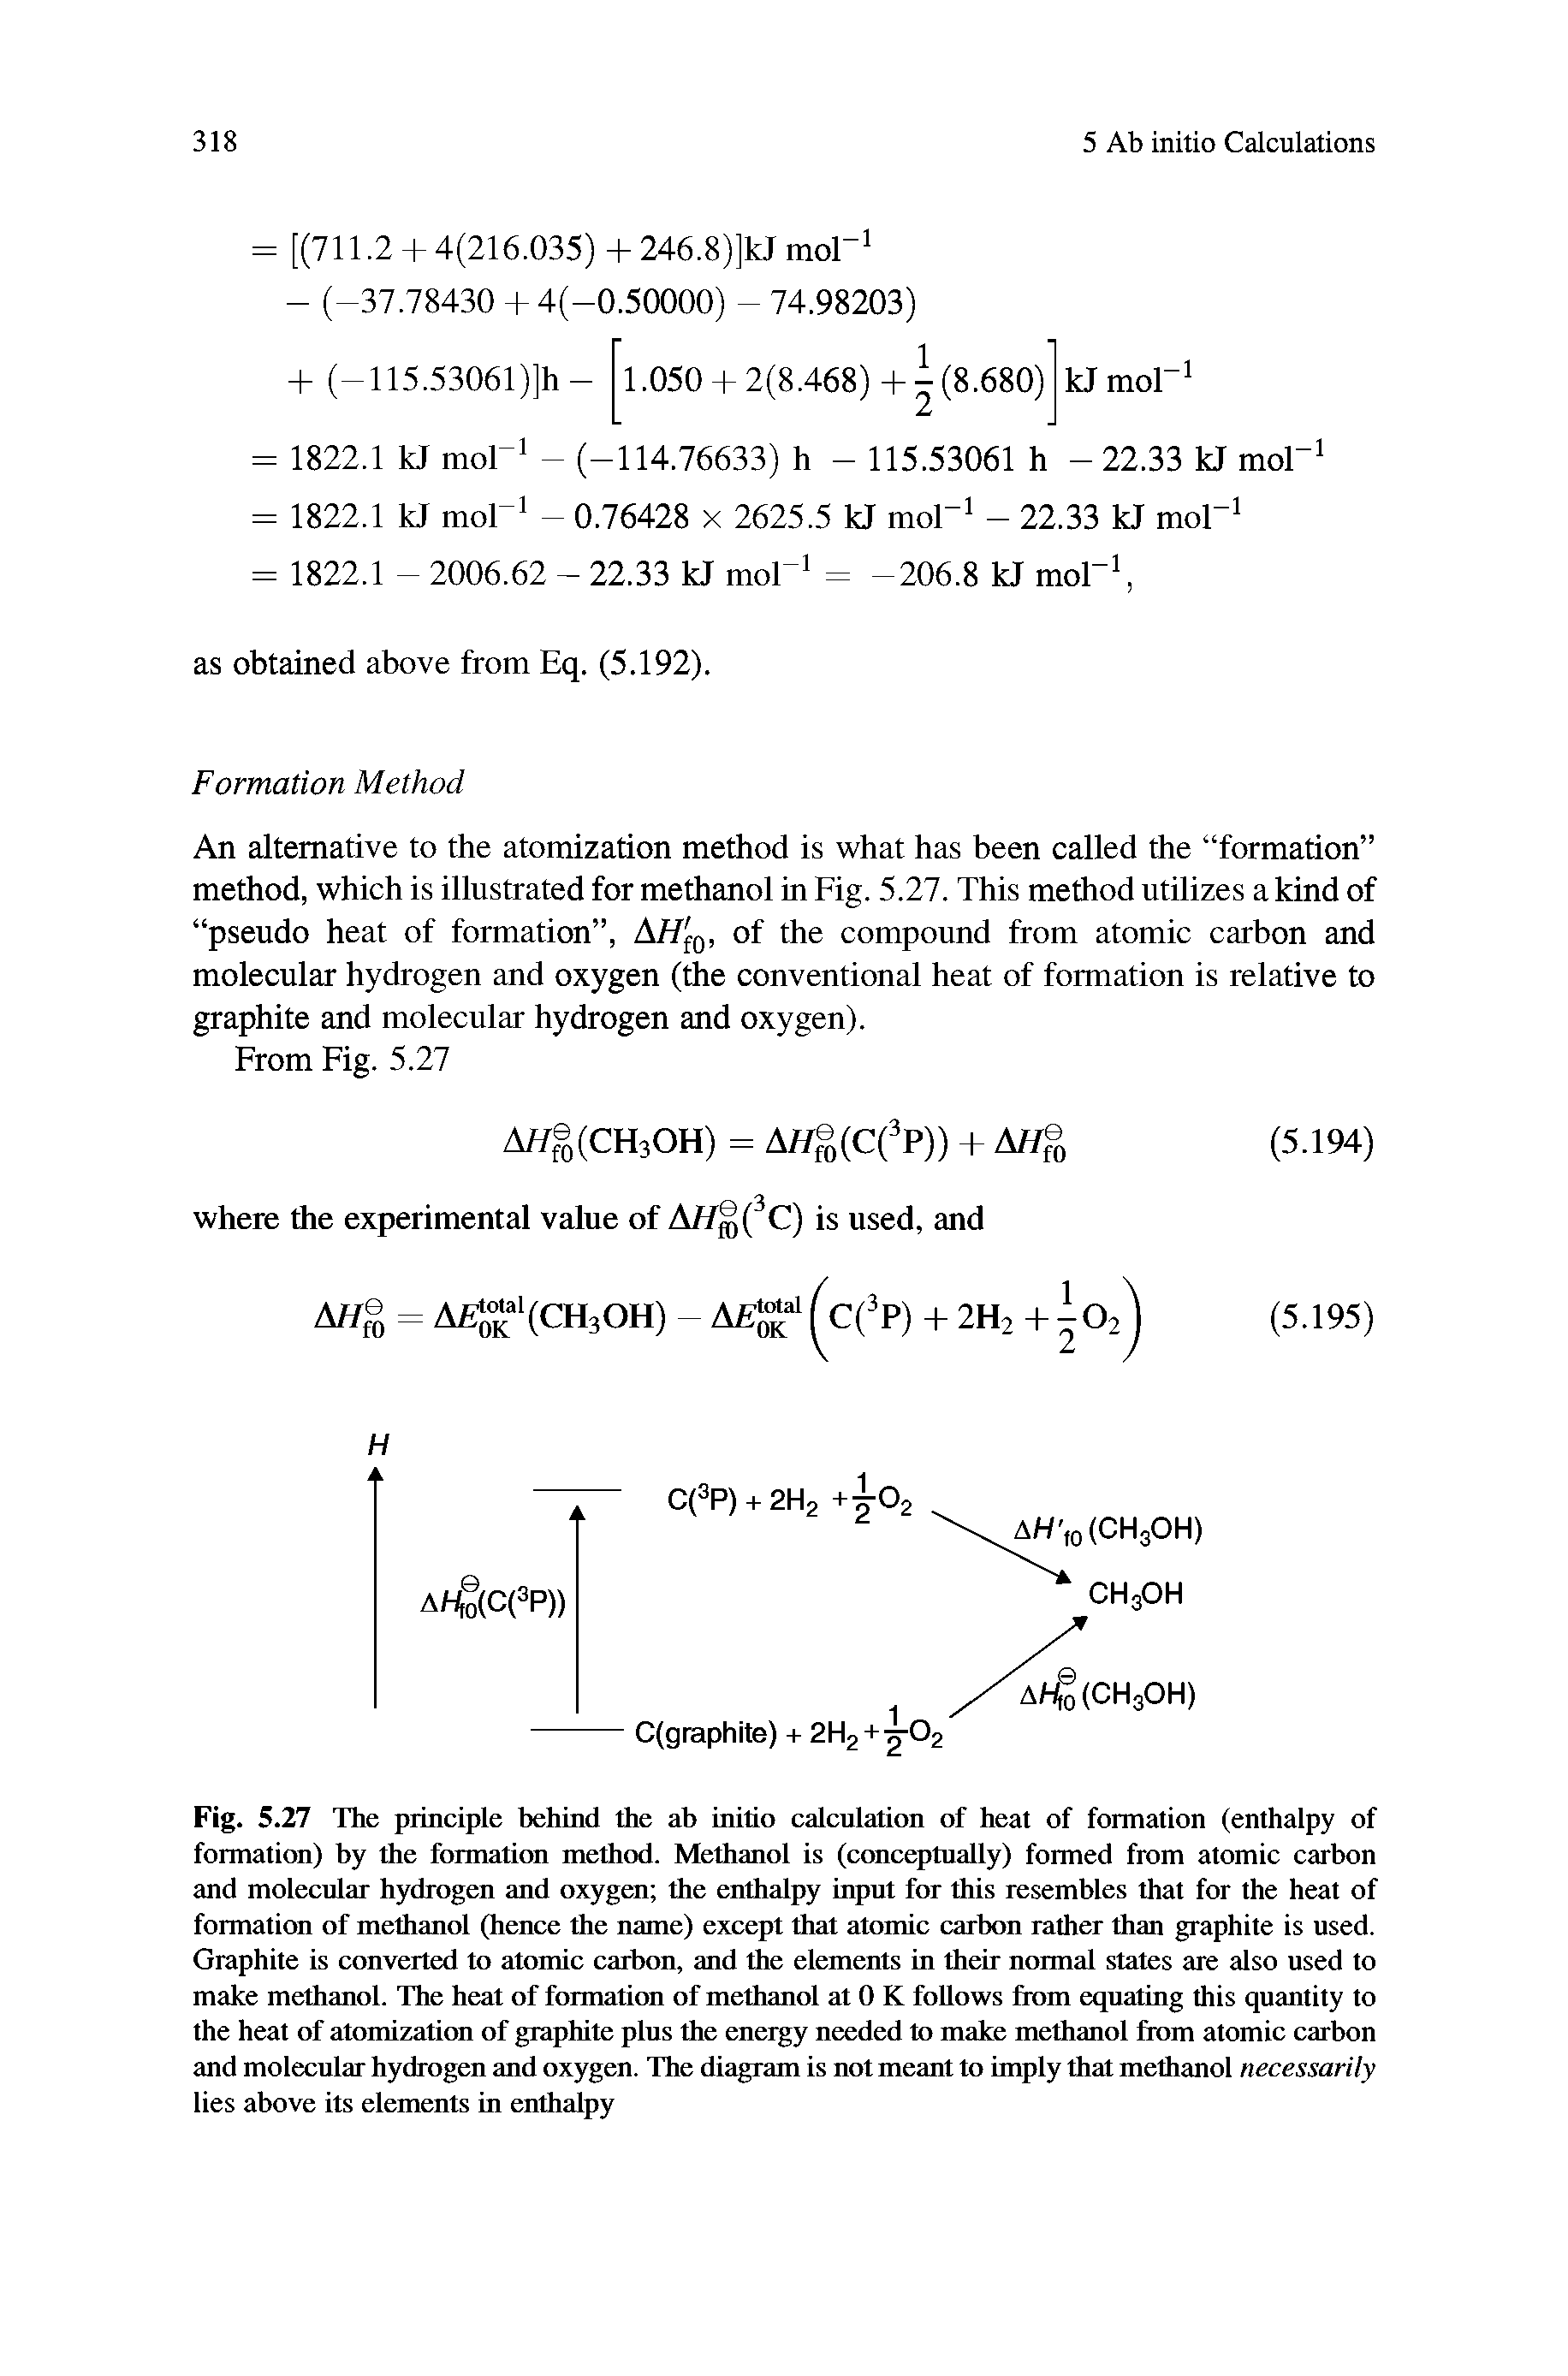 Fig. 5.27 The principle behind the ab initio calculation of heat of formation (enthalpy of formation) by the formation method. Methanol is (conceptually) formed from atomic carbon and molecular hydrogen and oxygen the enthalpy input for this resembles that for the heat of formation of methanol (hence the name) except that atomic carbon rather than graphite is used. Graphite is converted to atomic carbon, and the elements in their normal states are also used to make methanol. The heat of formation of methanol at 0 K follows from equating this quantity to the heat of atomization of graphite plus the energy needed to make methanol from atomic carbon and molecular hydrogen and oxygen. The diagram is not meant to imply that methanol necessarily lies above its elements in enthalpy...